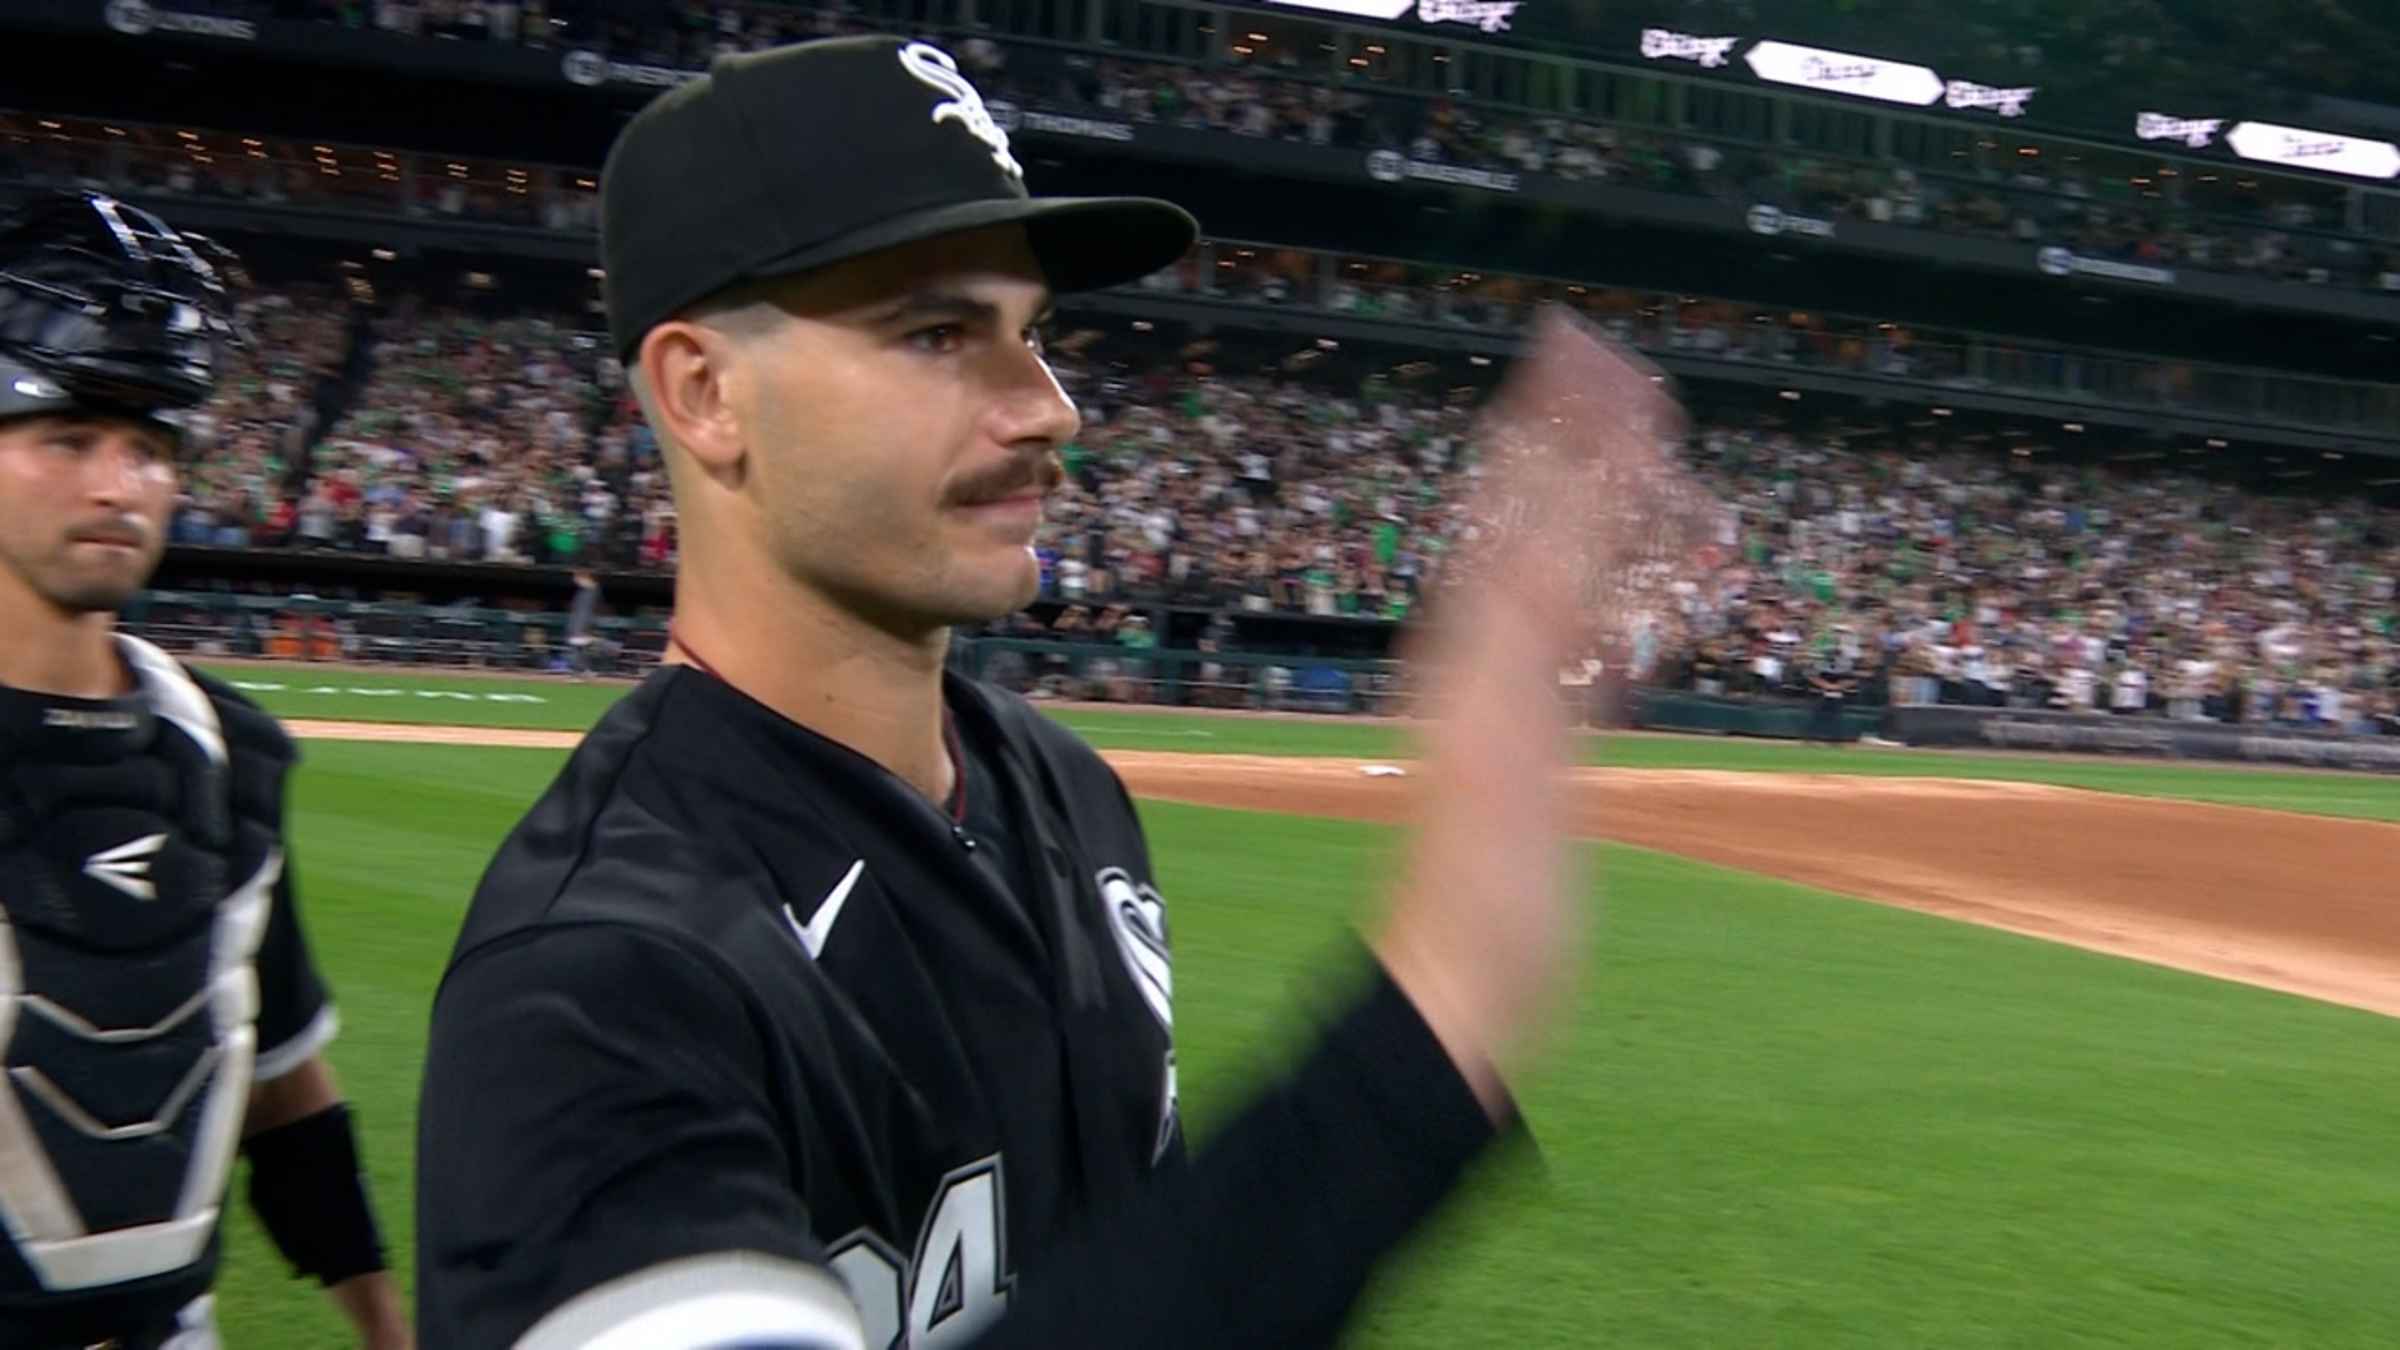 9/3/22- Dylan Cease loses no hitter with one out remaining